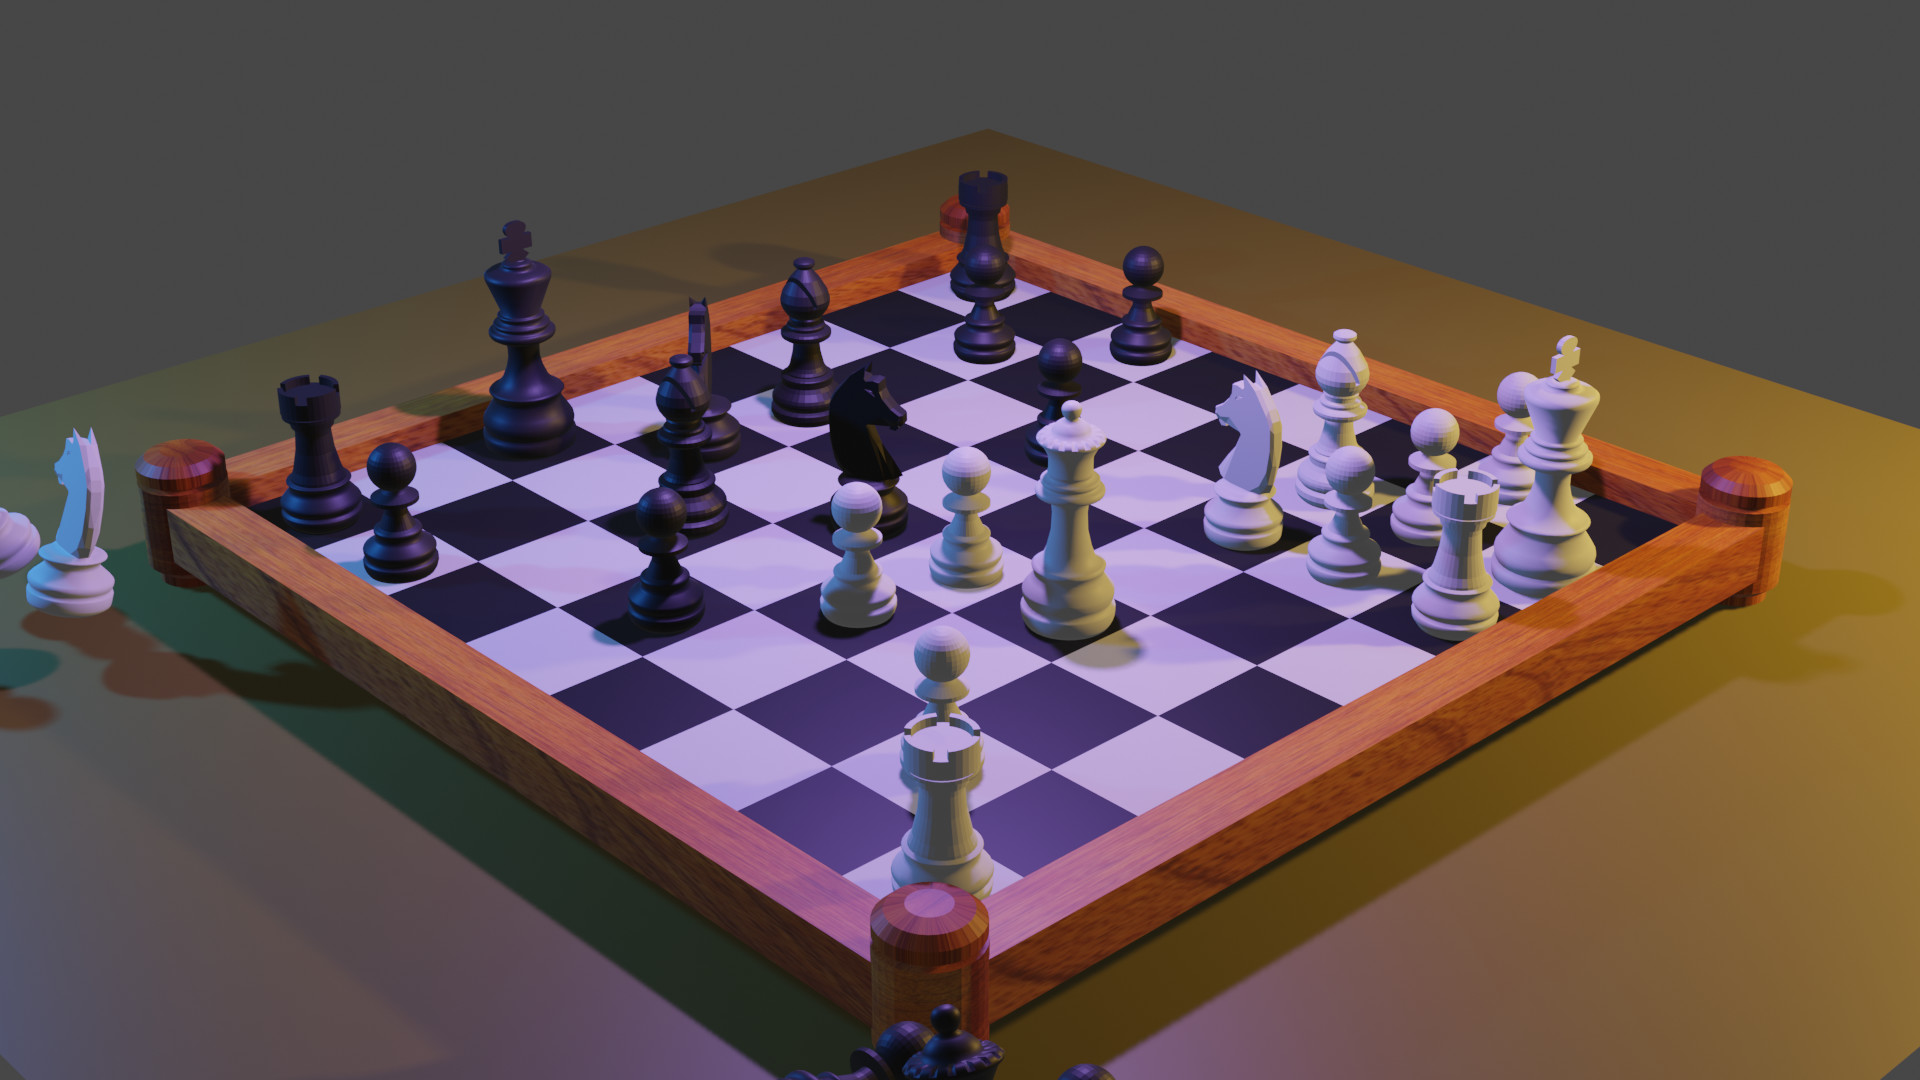 Online chess that simulates 3D over the board chess - Chess Forums - Chess .com